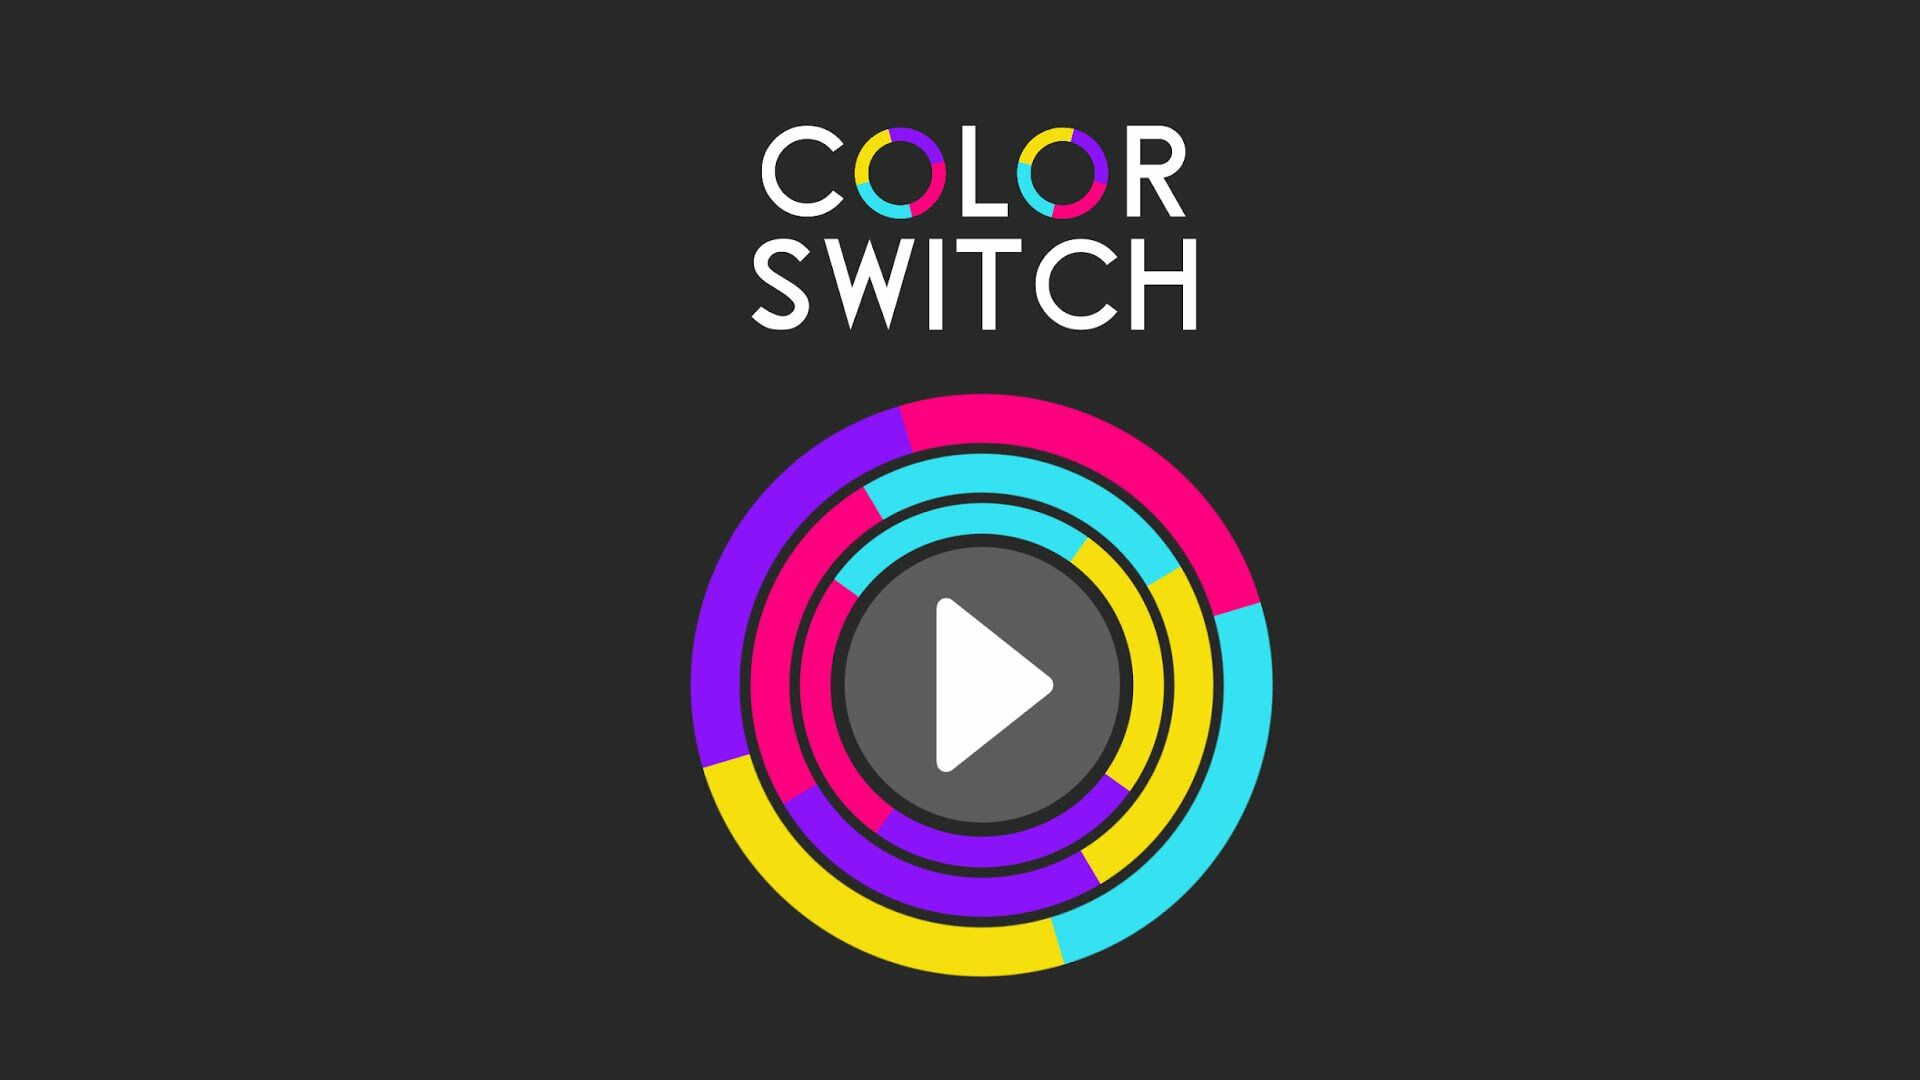 Colorswitch